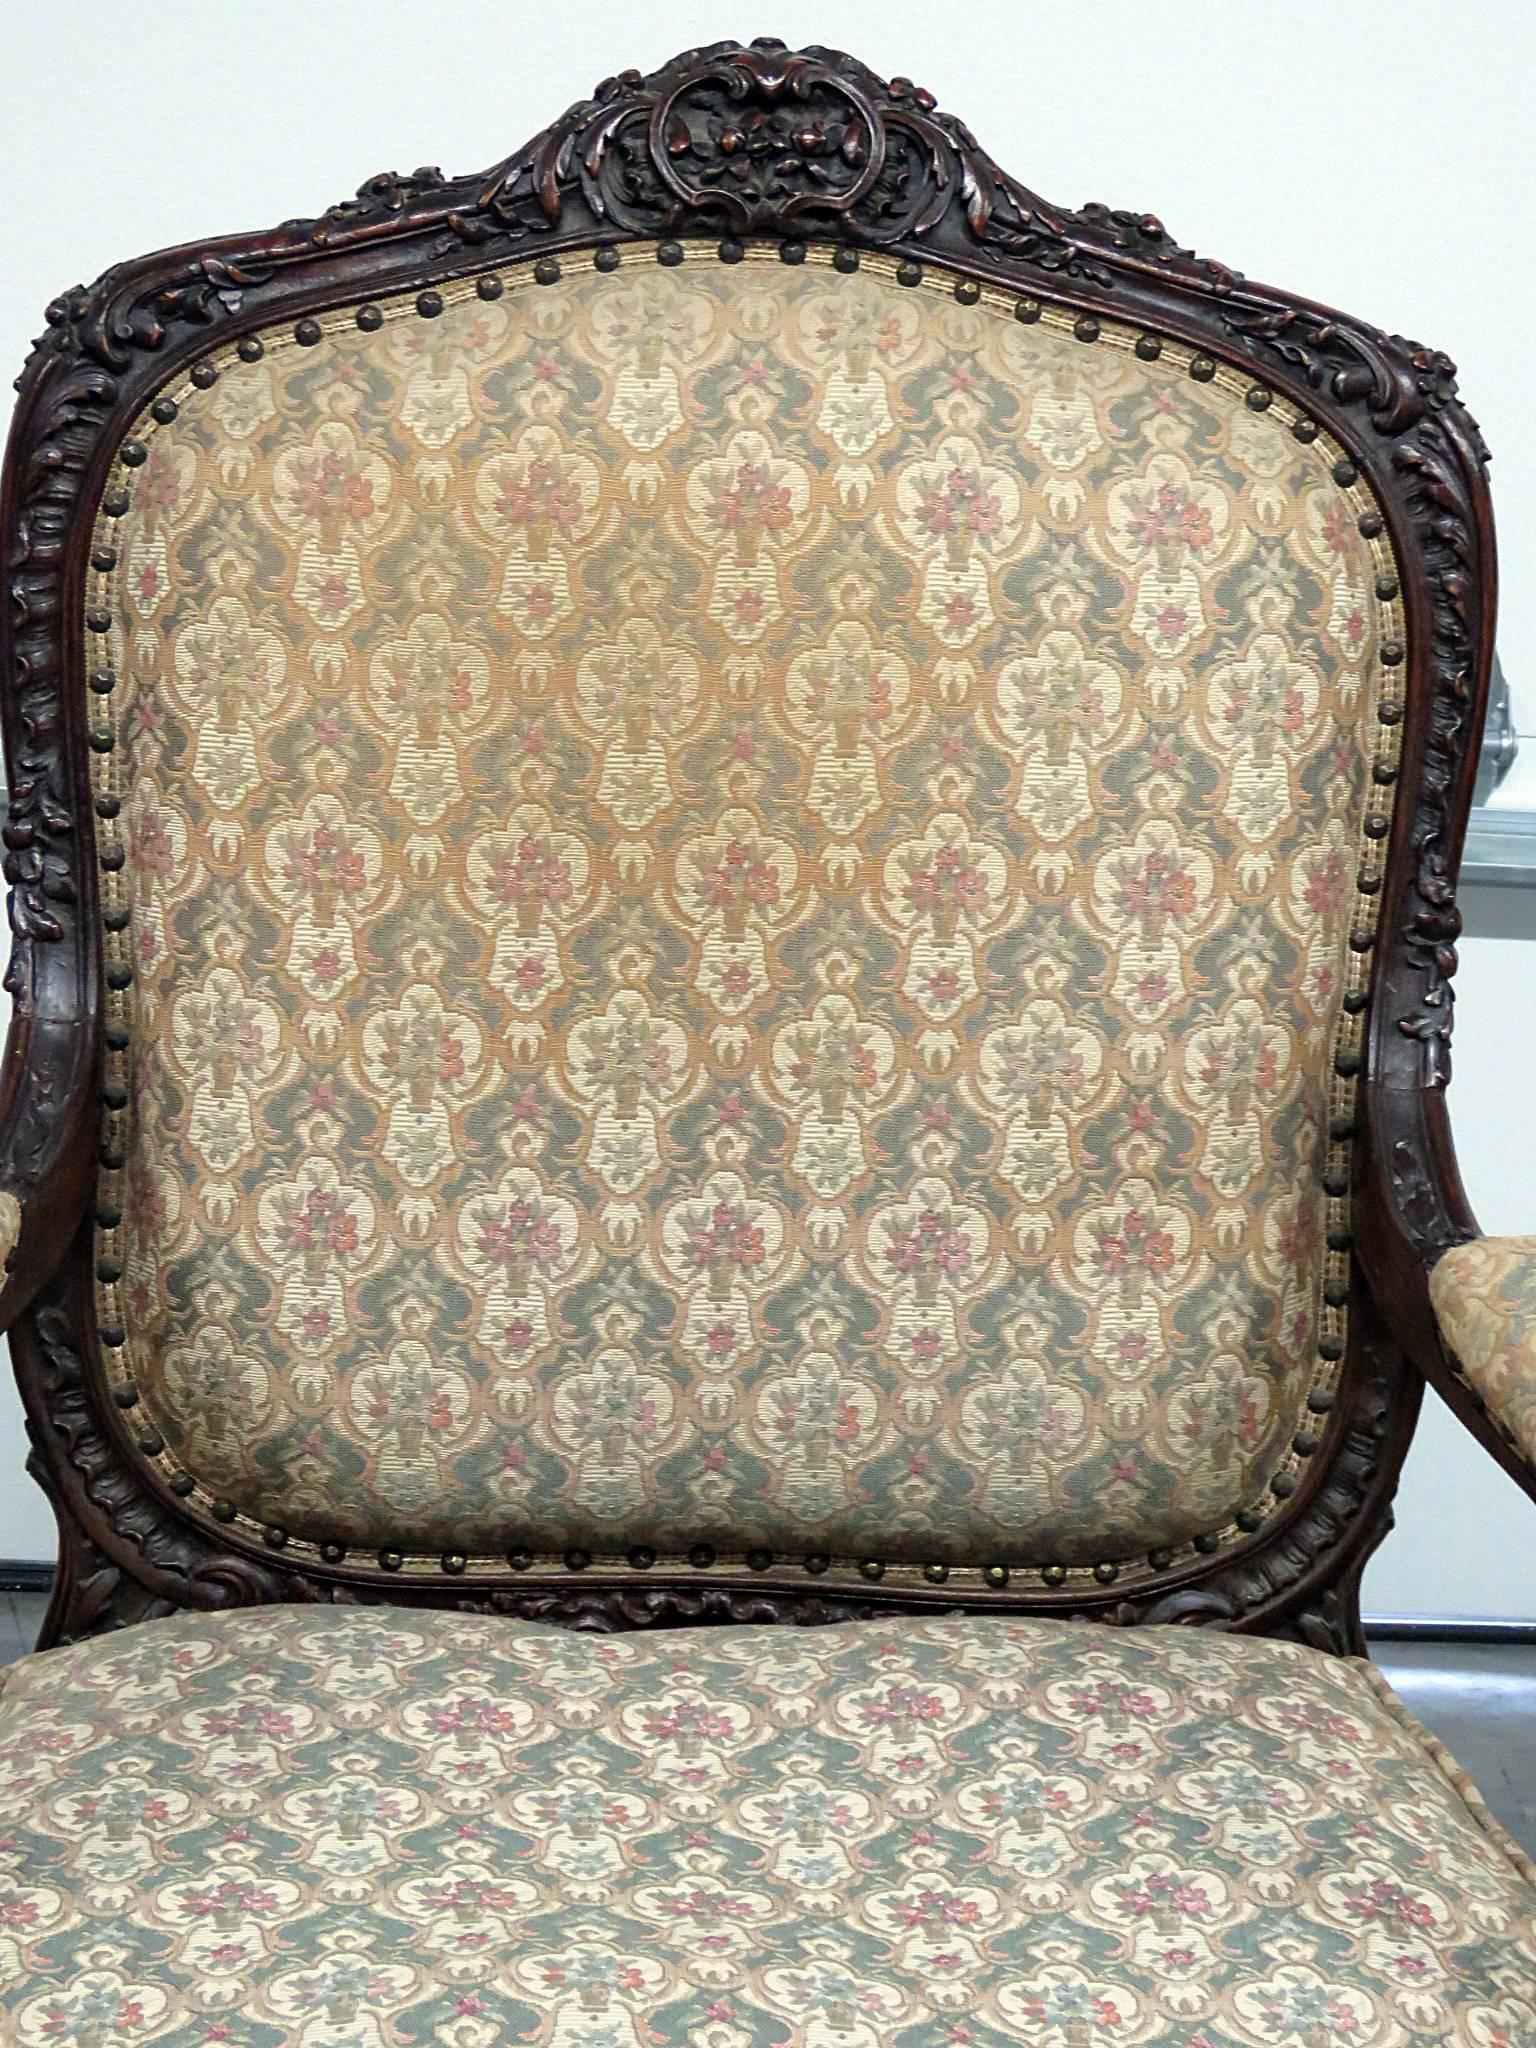 Renaissance style carved mahogany fauteuil. Measure: 21